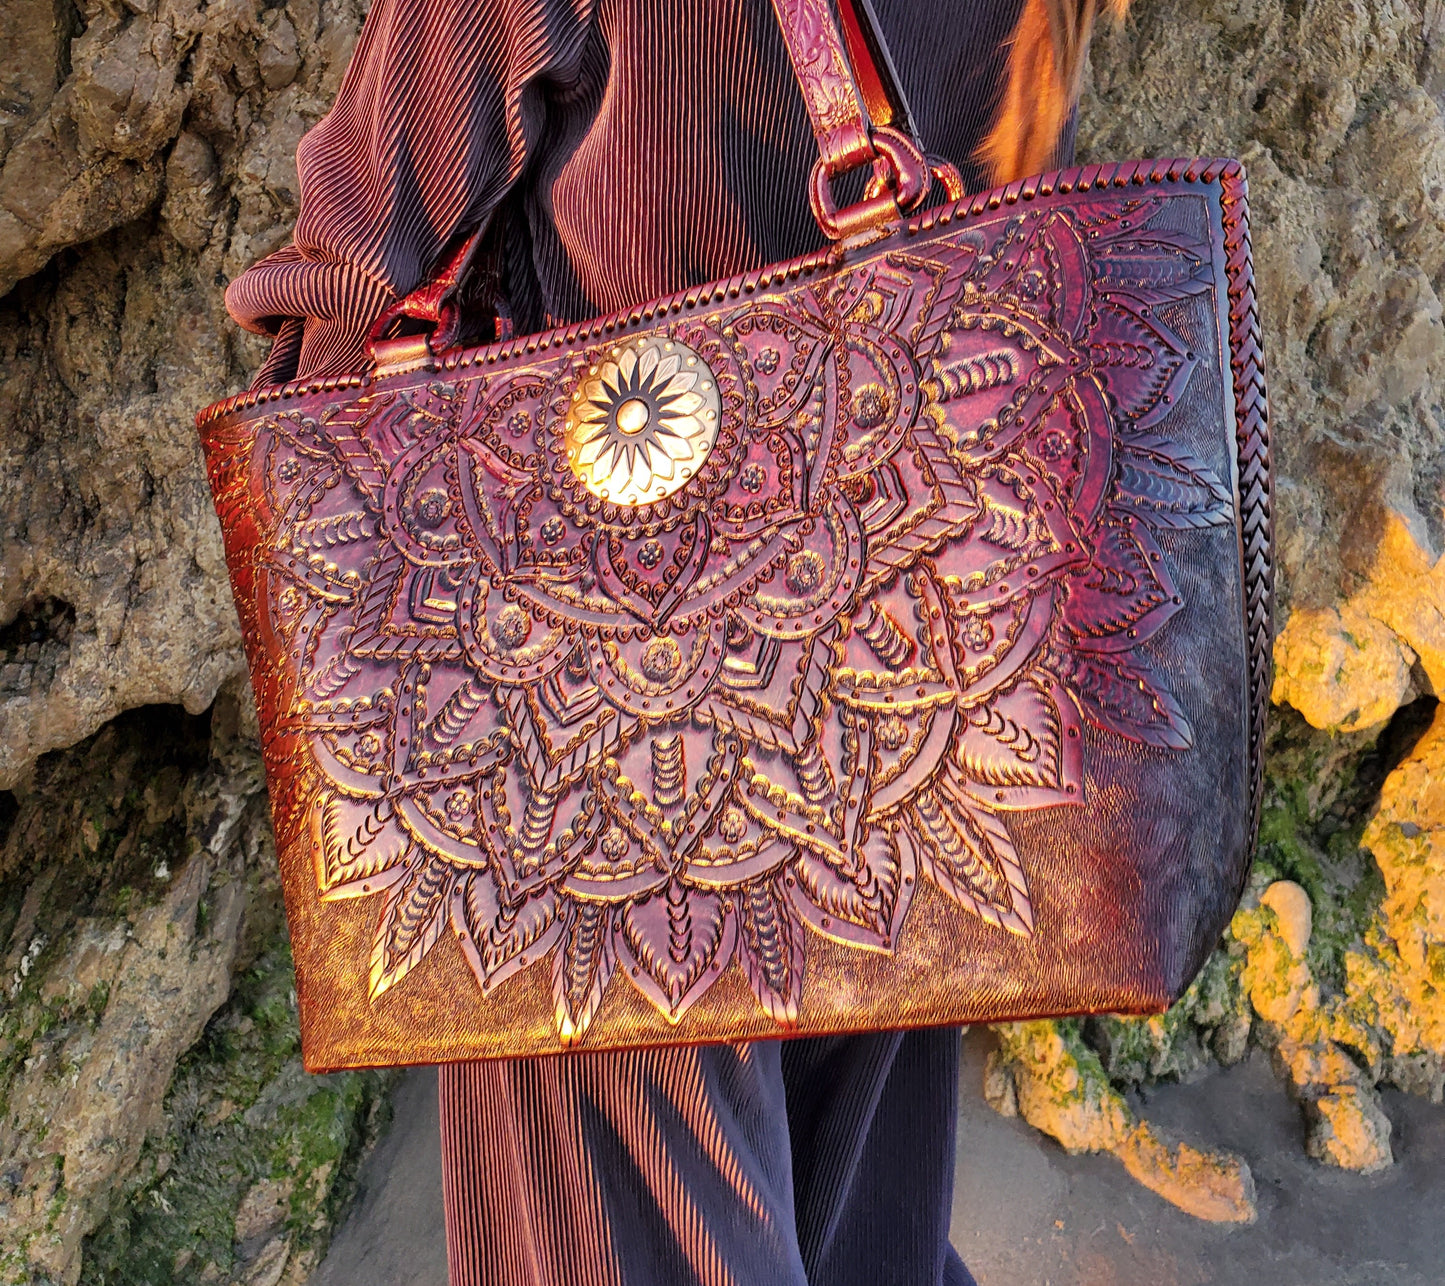 Hand Made Leather Tote Bag "MIA" by MIOHERMOSA Brown Mia Swirls Top